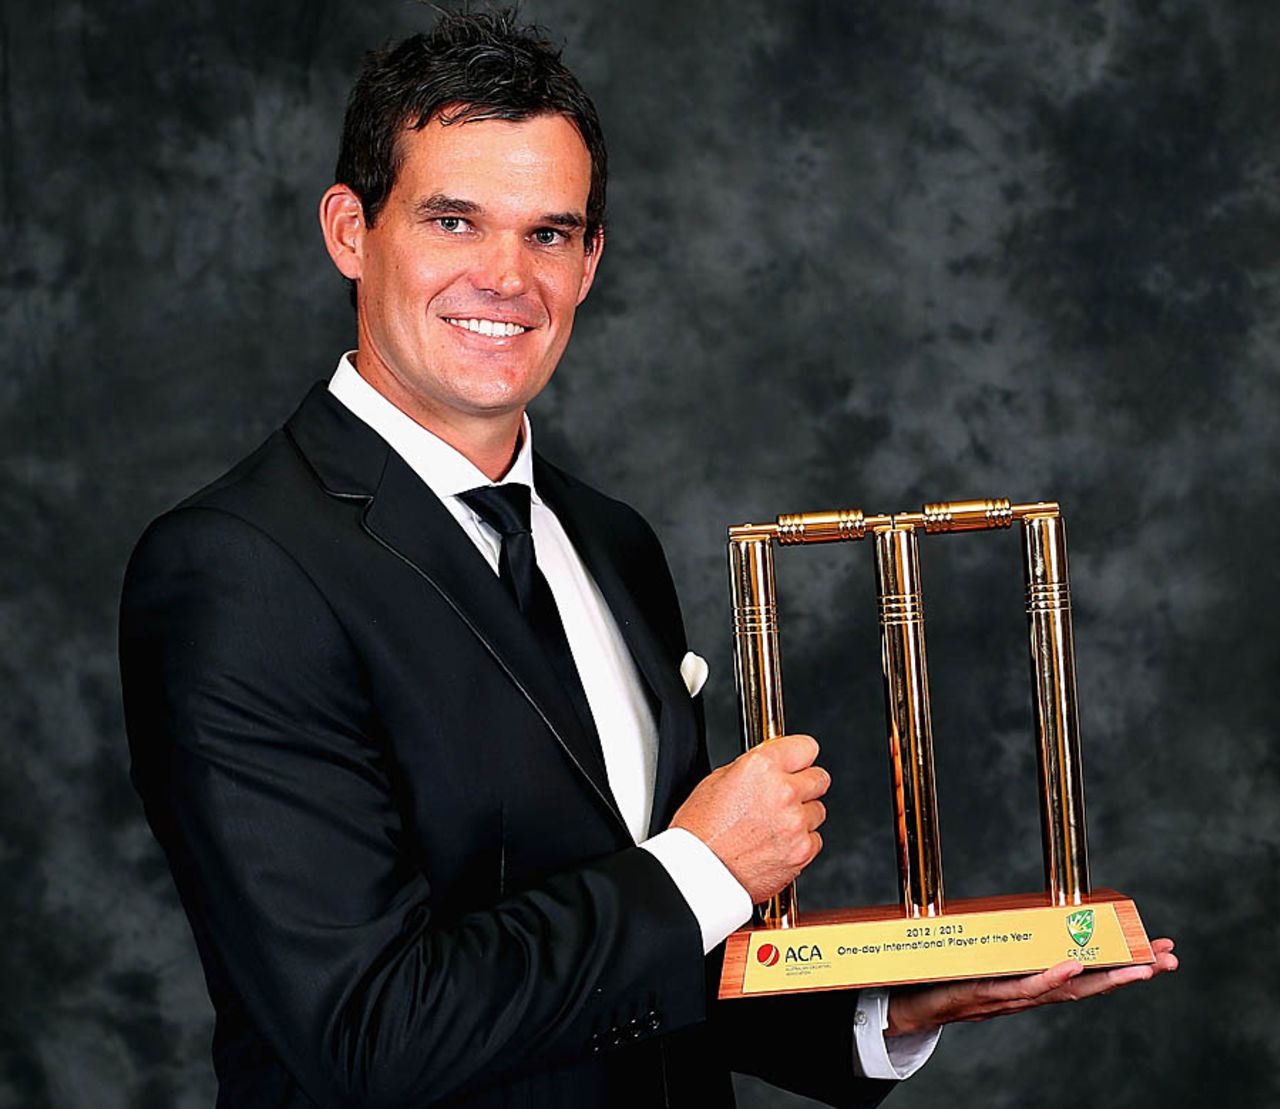 Clint McKay won the ODI player of the year award, Melbourne, February 4, 2013